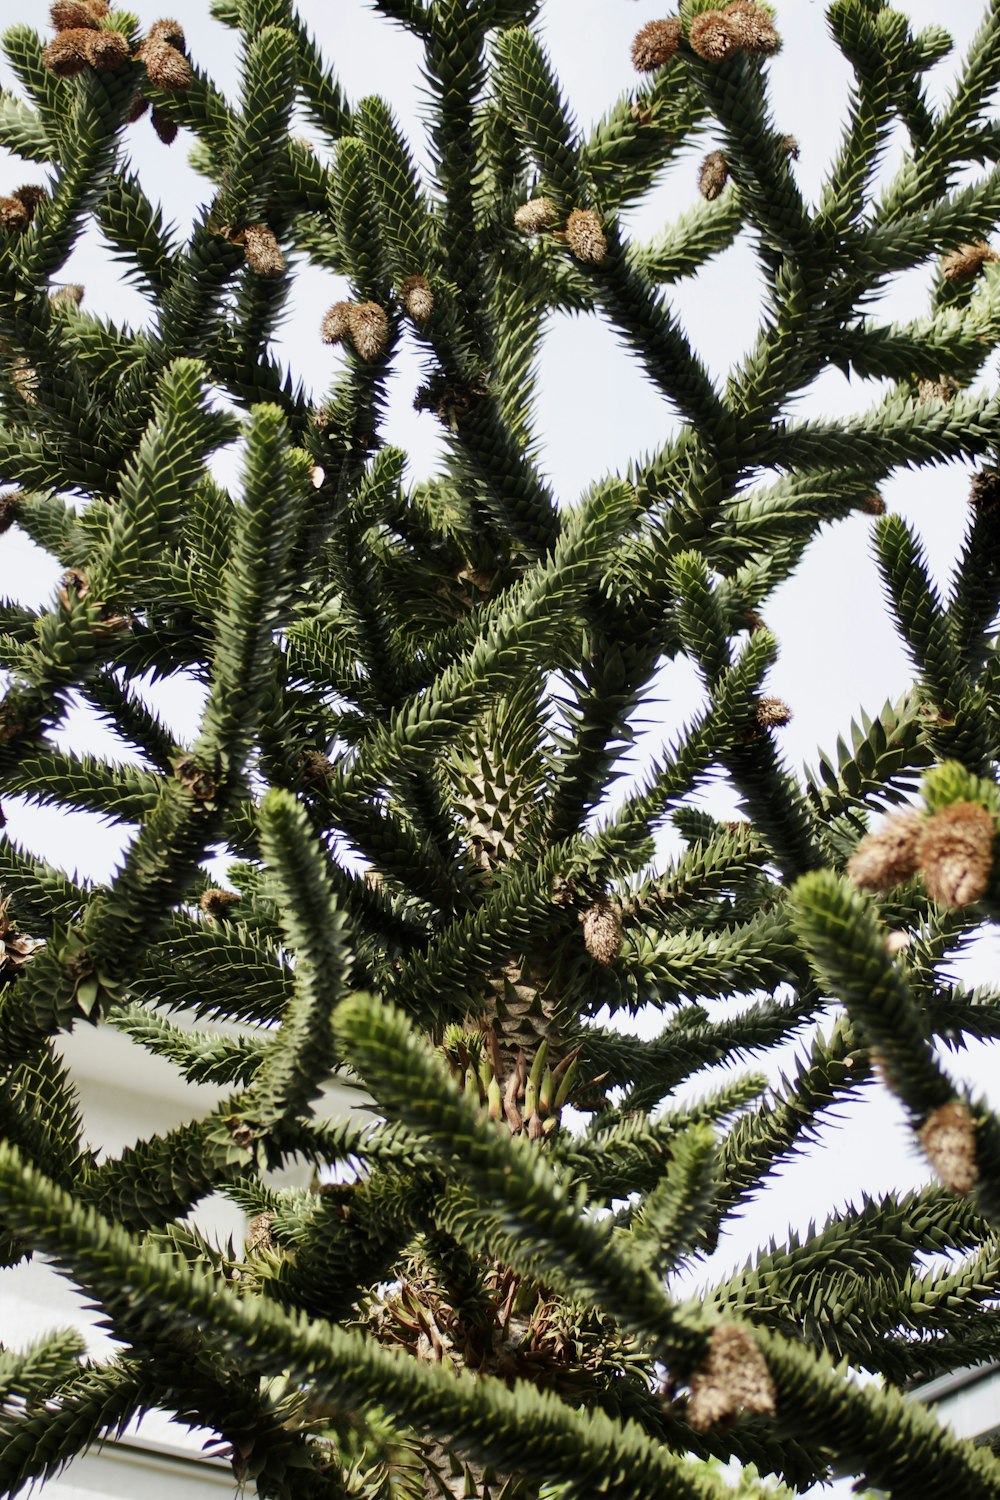 a close up of a pine tree with a building in the background